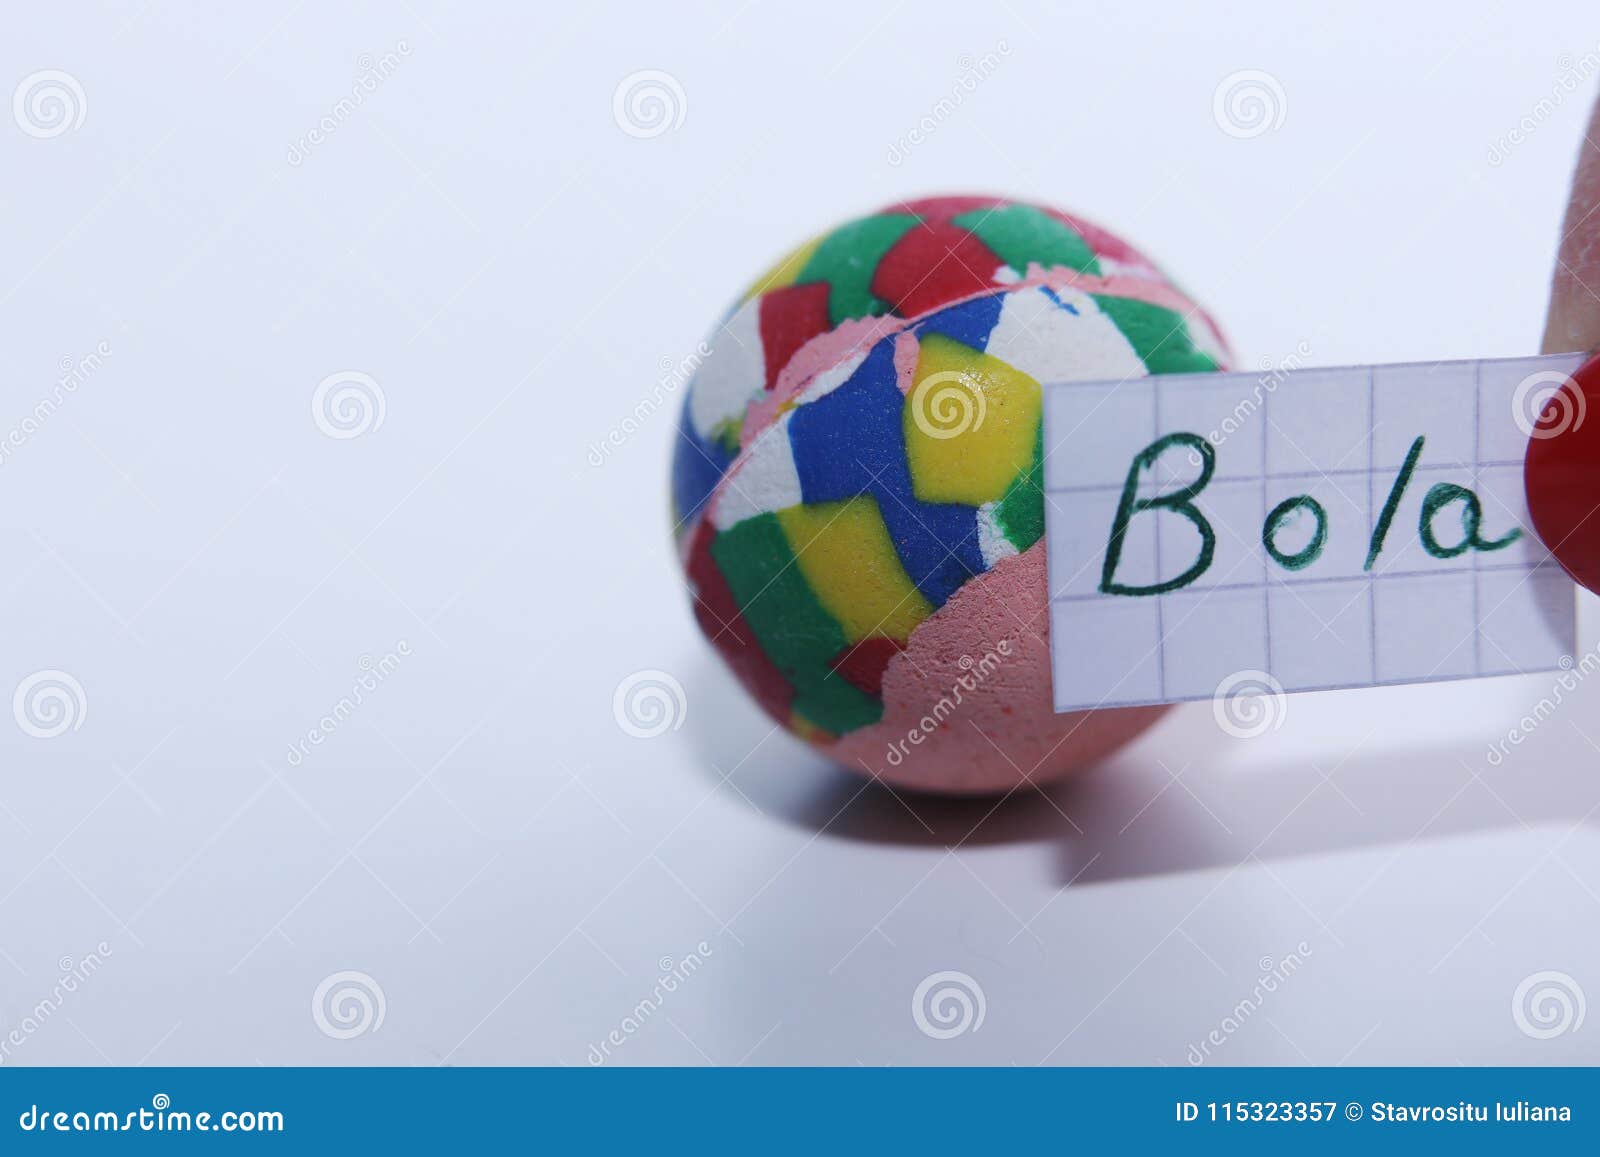 bola word in spanish for ball in english